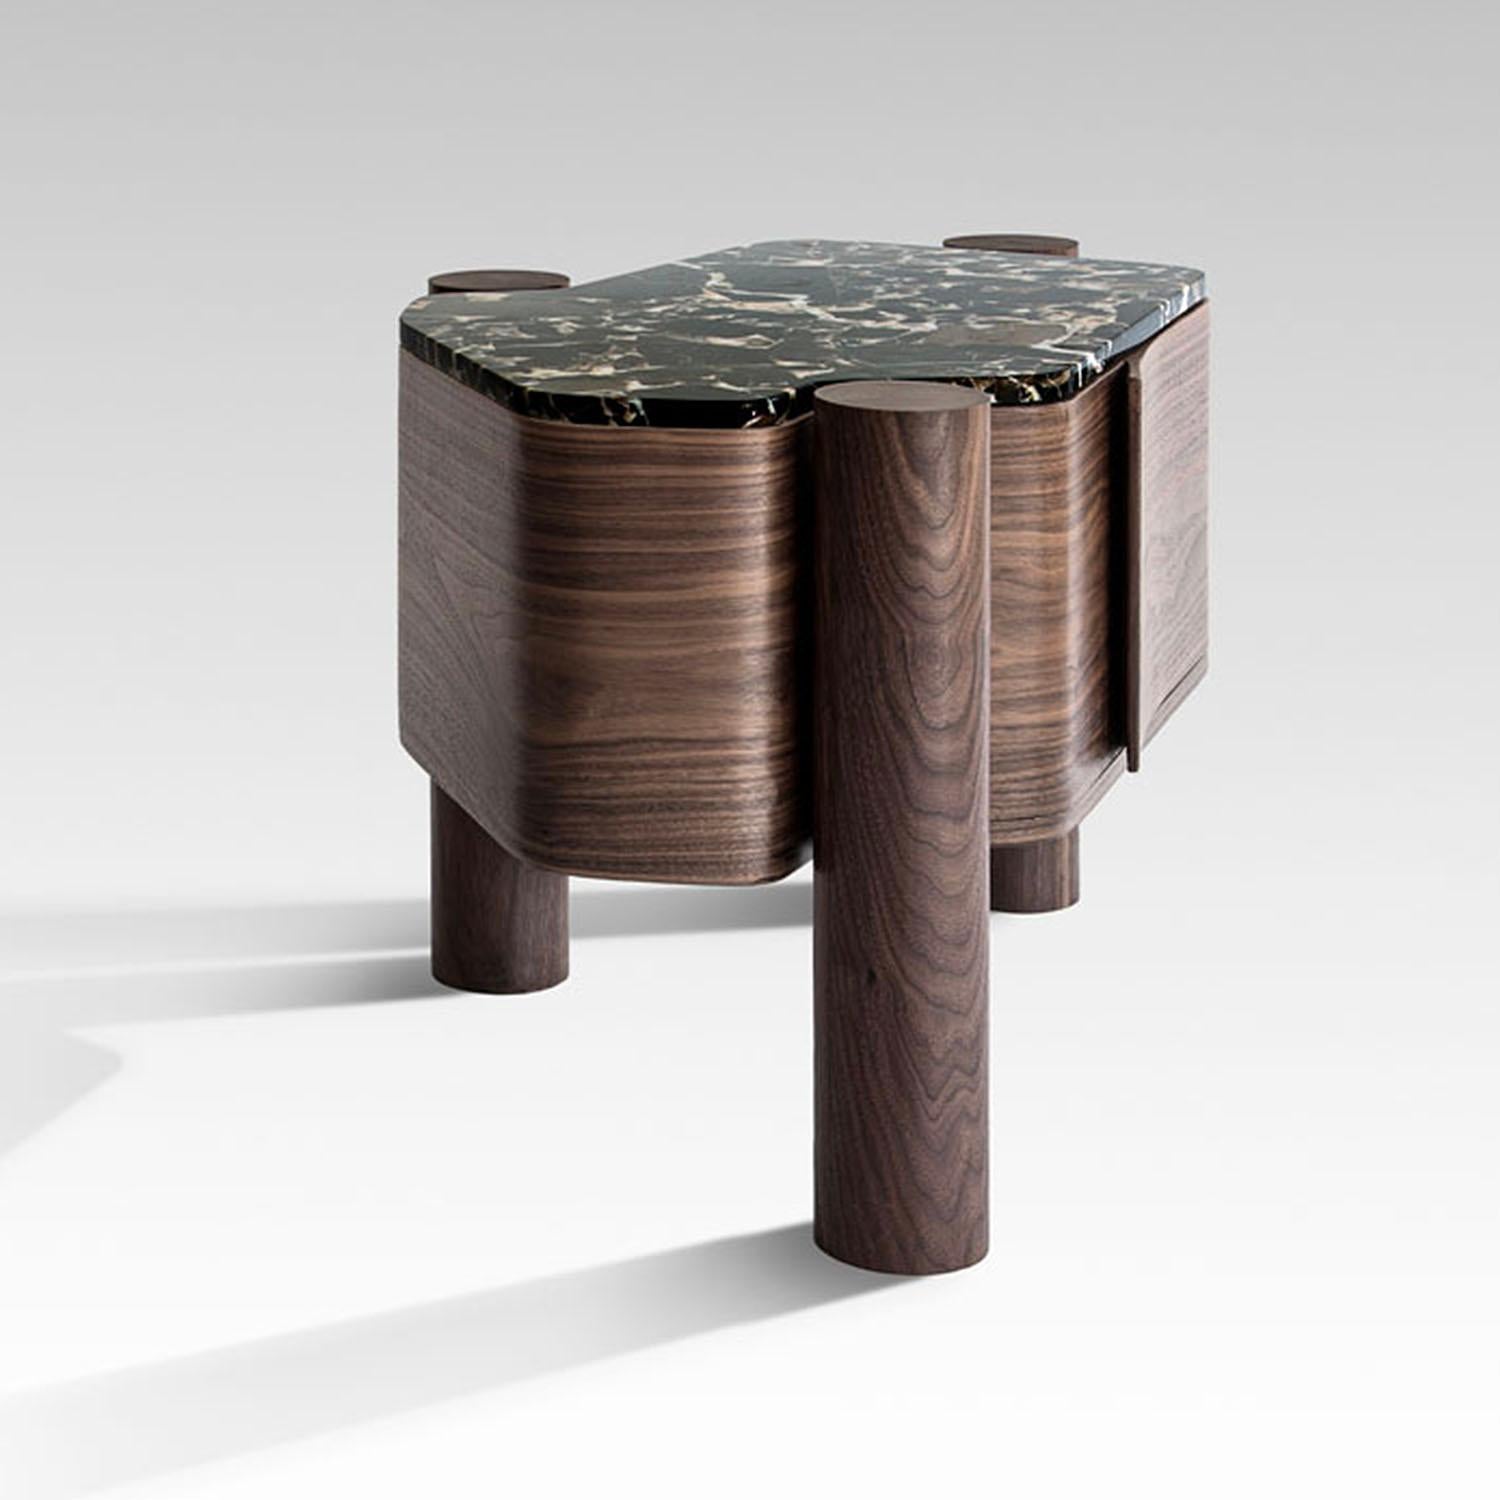 Contemporary Marble & Wood Side Table, Villa Bed Pedestal by Adam Court for Okha In New Condition For Sale In Warsaw, PL